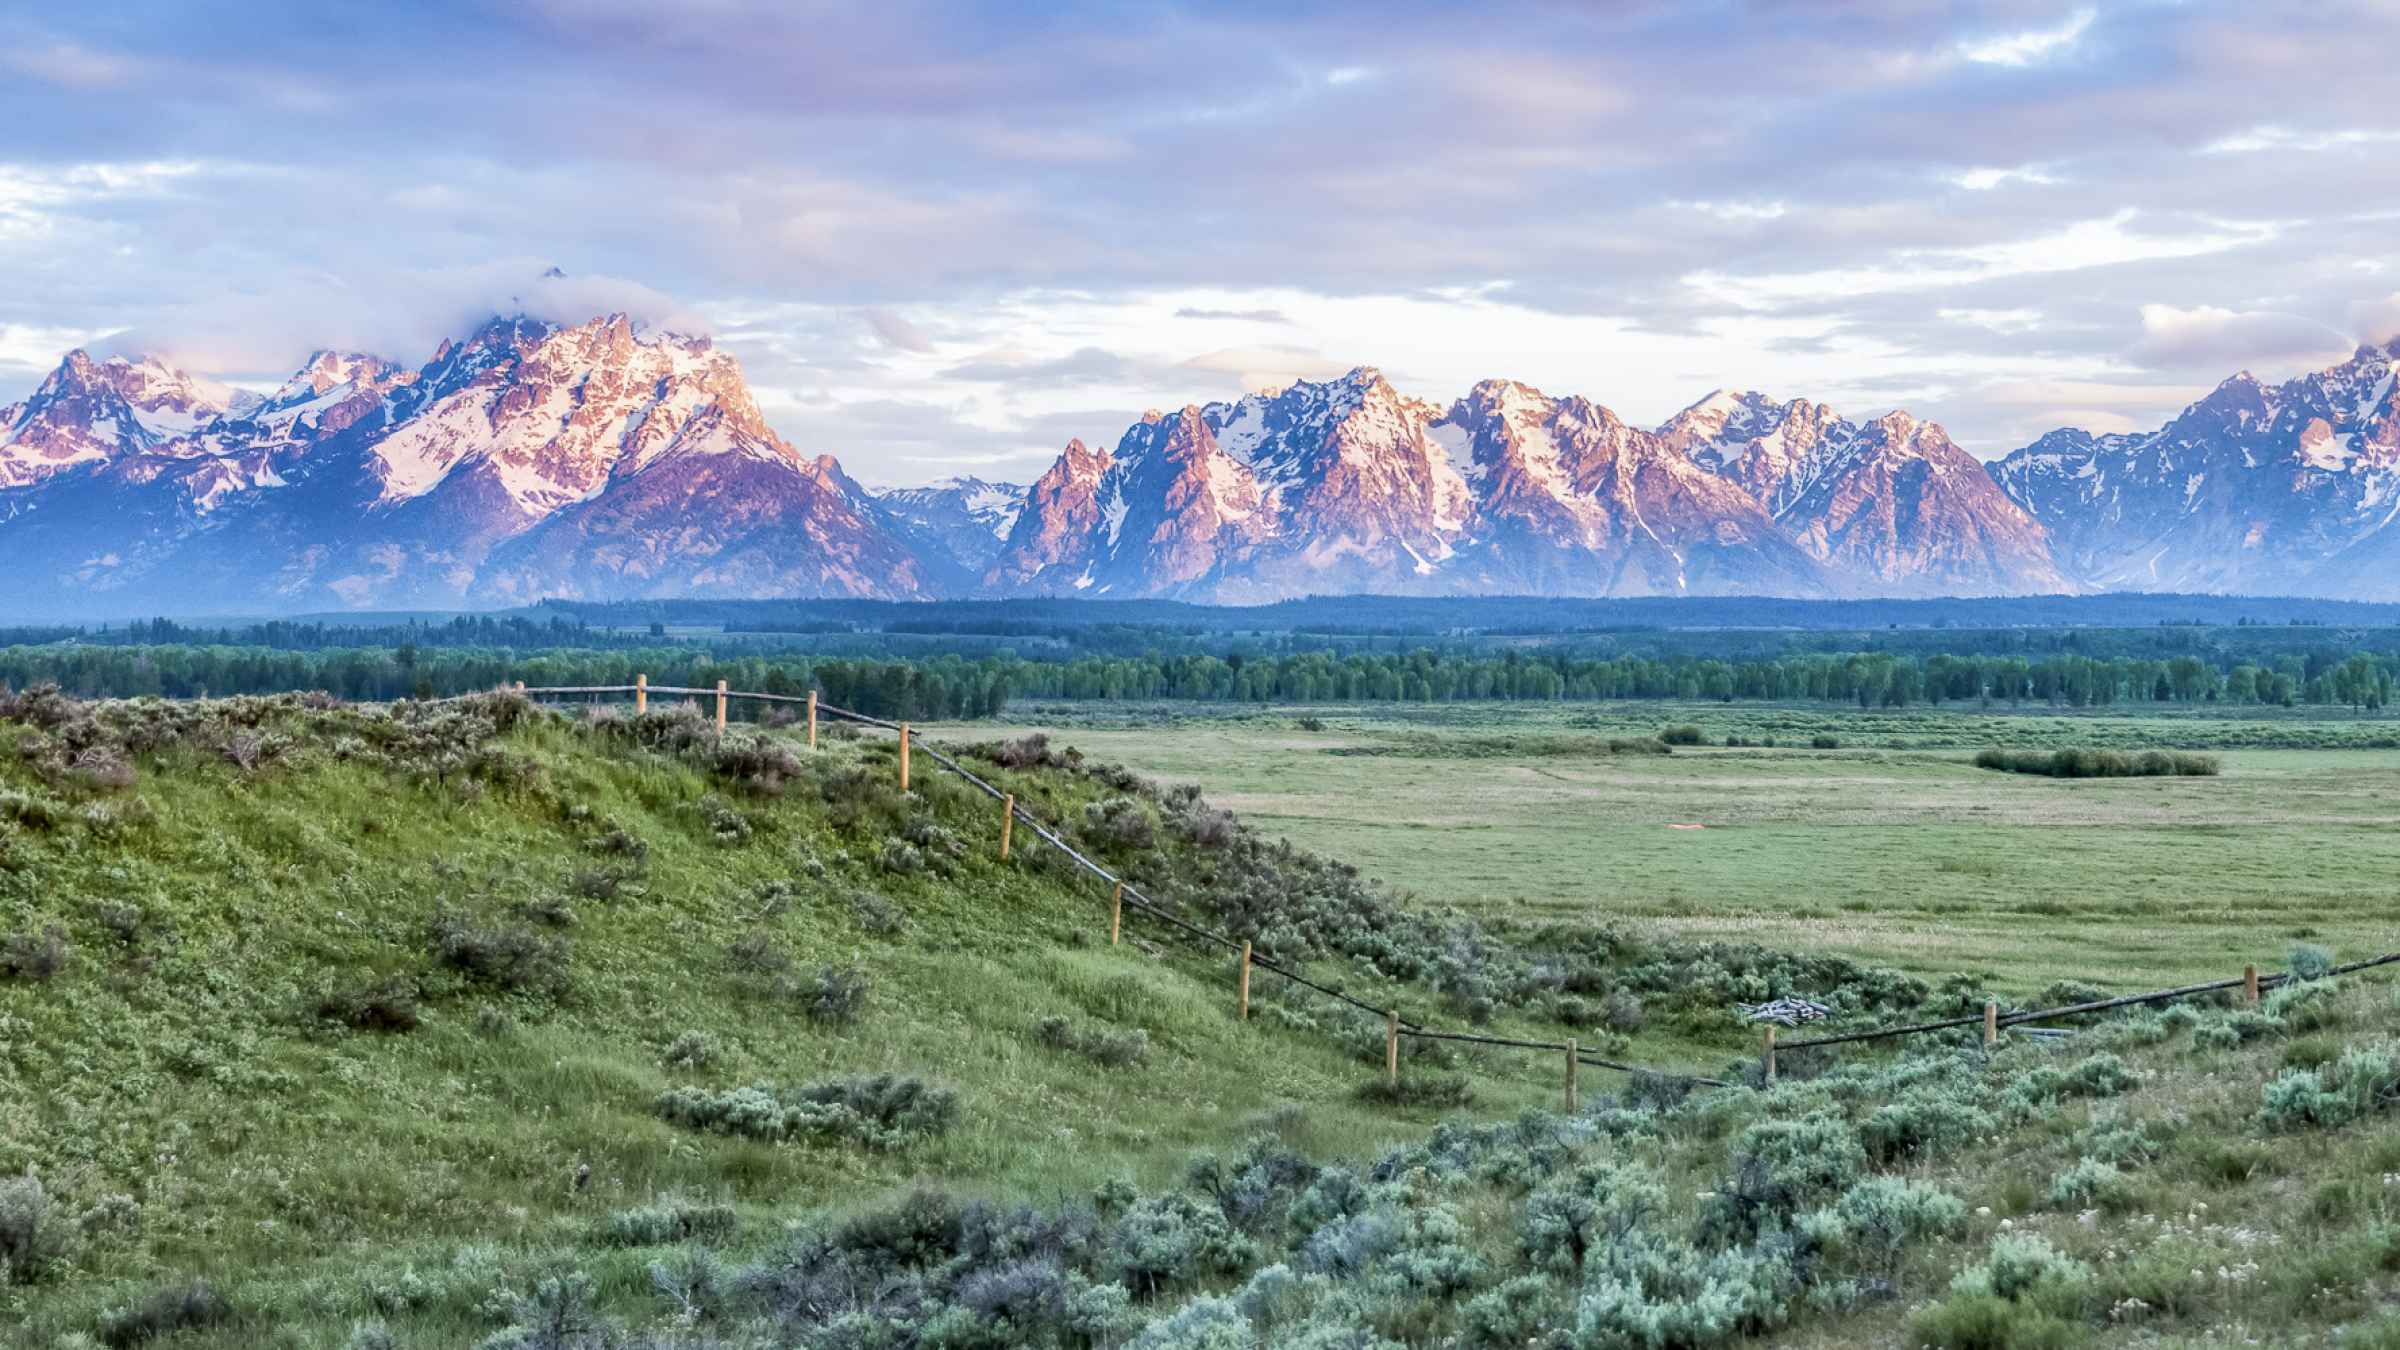 Teton Village 2021 Top 10 Tours & Activities (with Photos) Things to